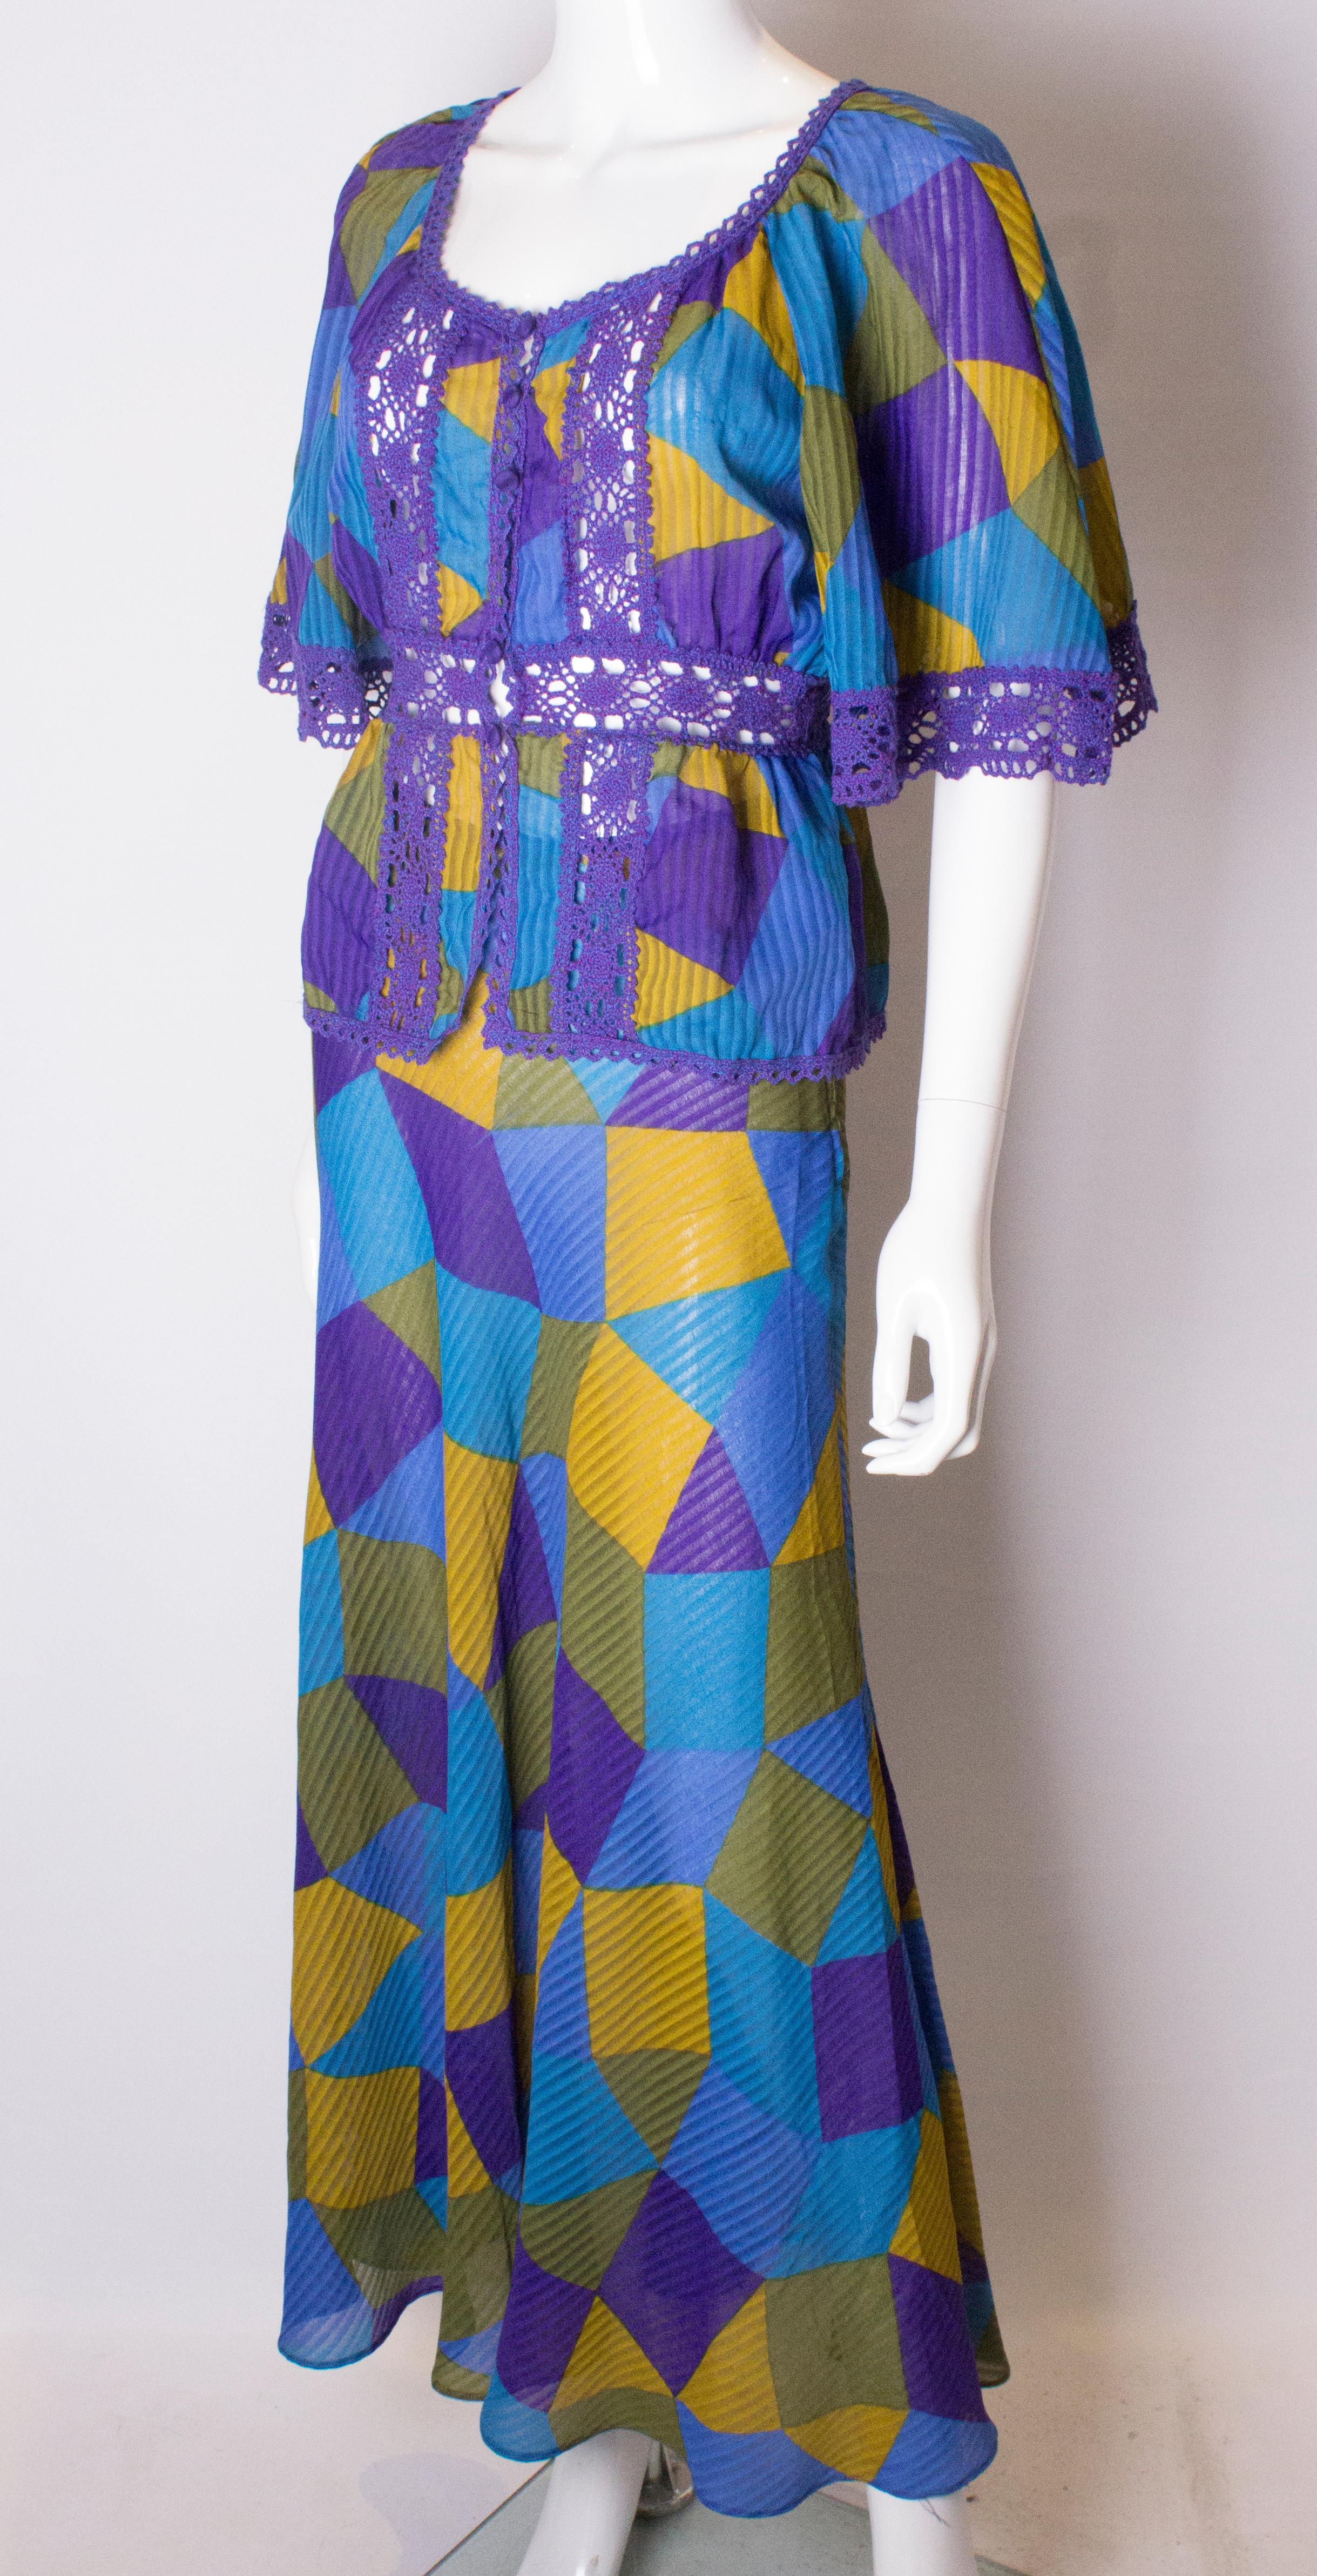 A fun top and skirt by Frank Usher. The outfit is in purple, ,green ,mustard , and blue.
The skirt has a side zip opening and the top has a 4 button front opening. 
Measurements: Skirt 26'', length 41'', jacket bust 36'', waist 27'', length 23''